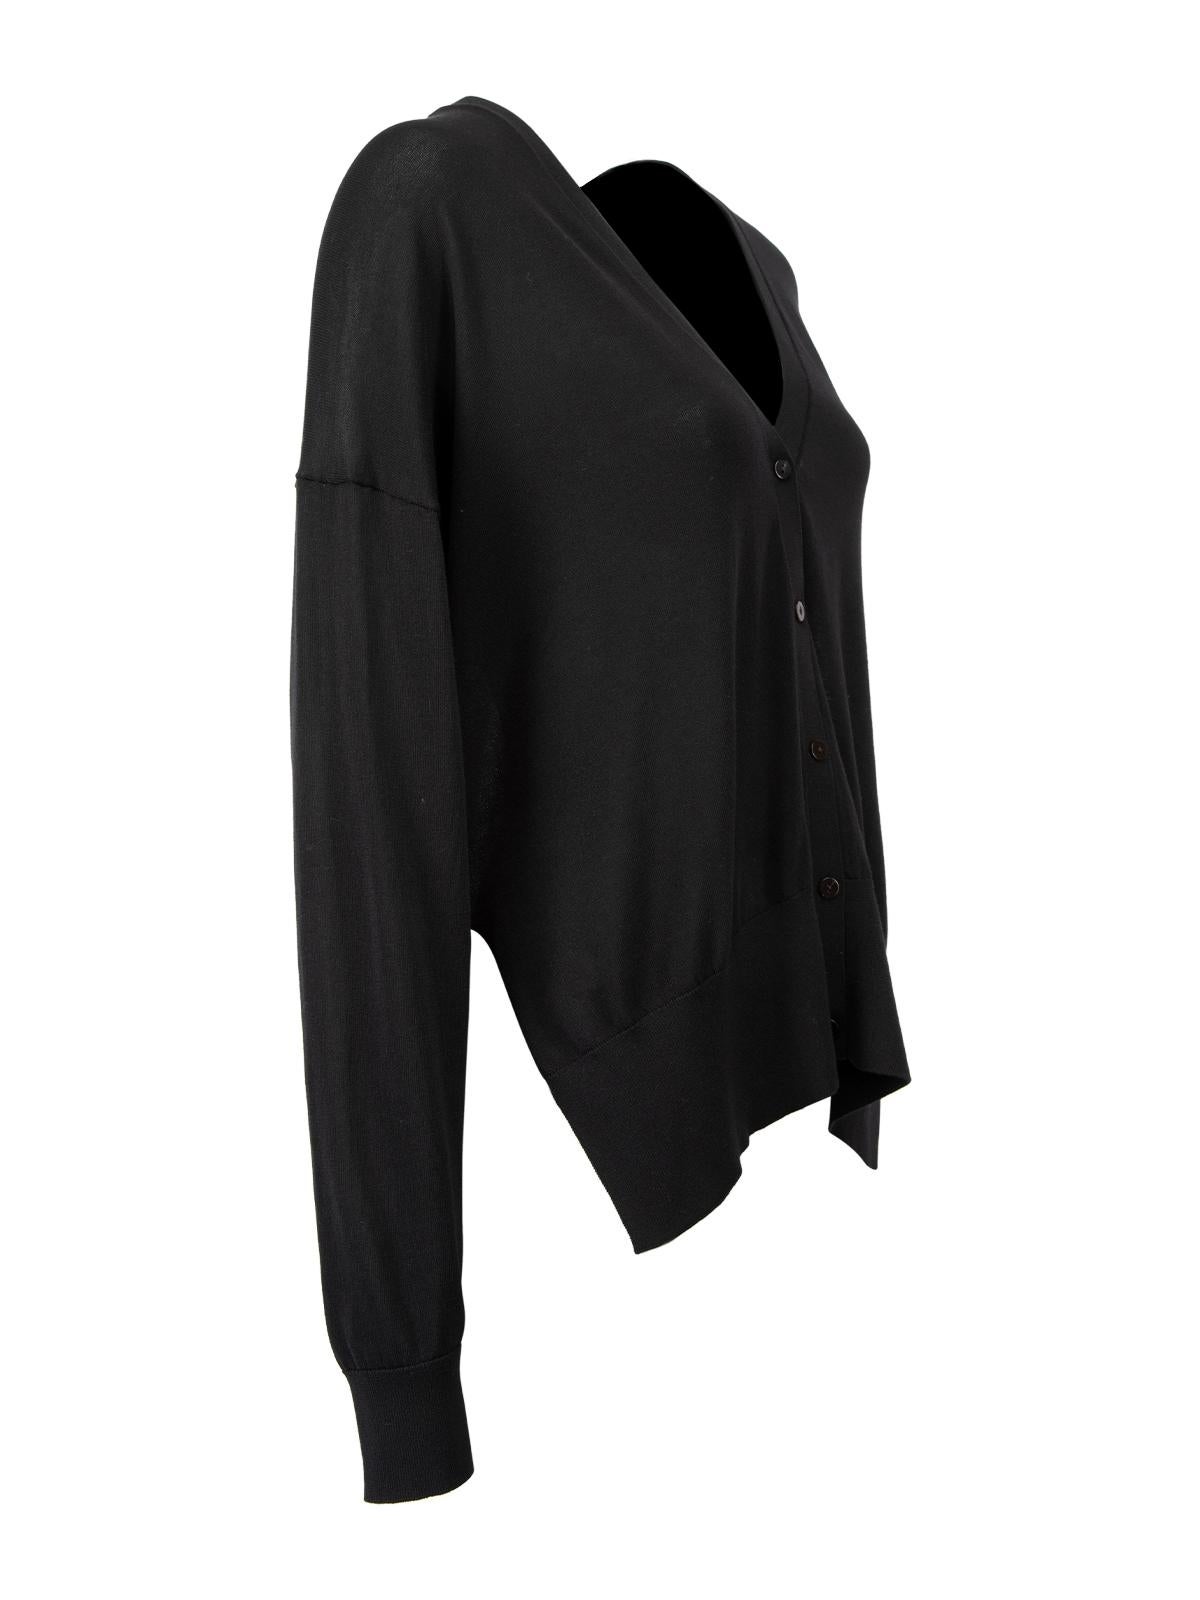 CONDITION is Never worn, with tags. No visible wear to cardigan is evident on this used Theory designer resale item. Details Black Cotton Drop hem Relaxed fit V-neck Button up front Long sleeves Ribbed neckline, cuffs and hemline Made in China